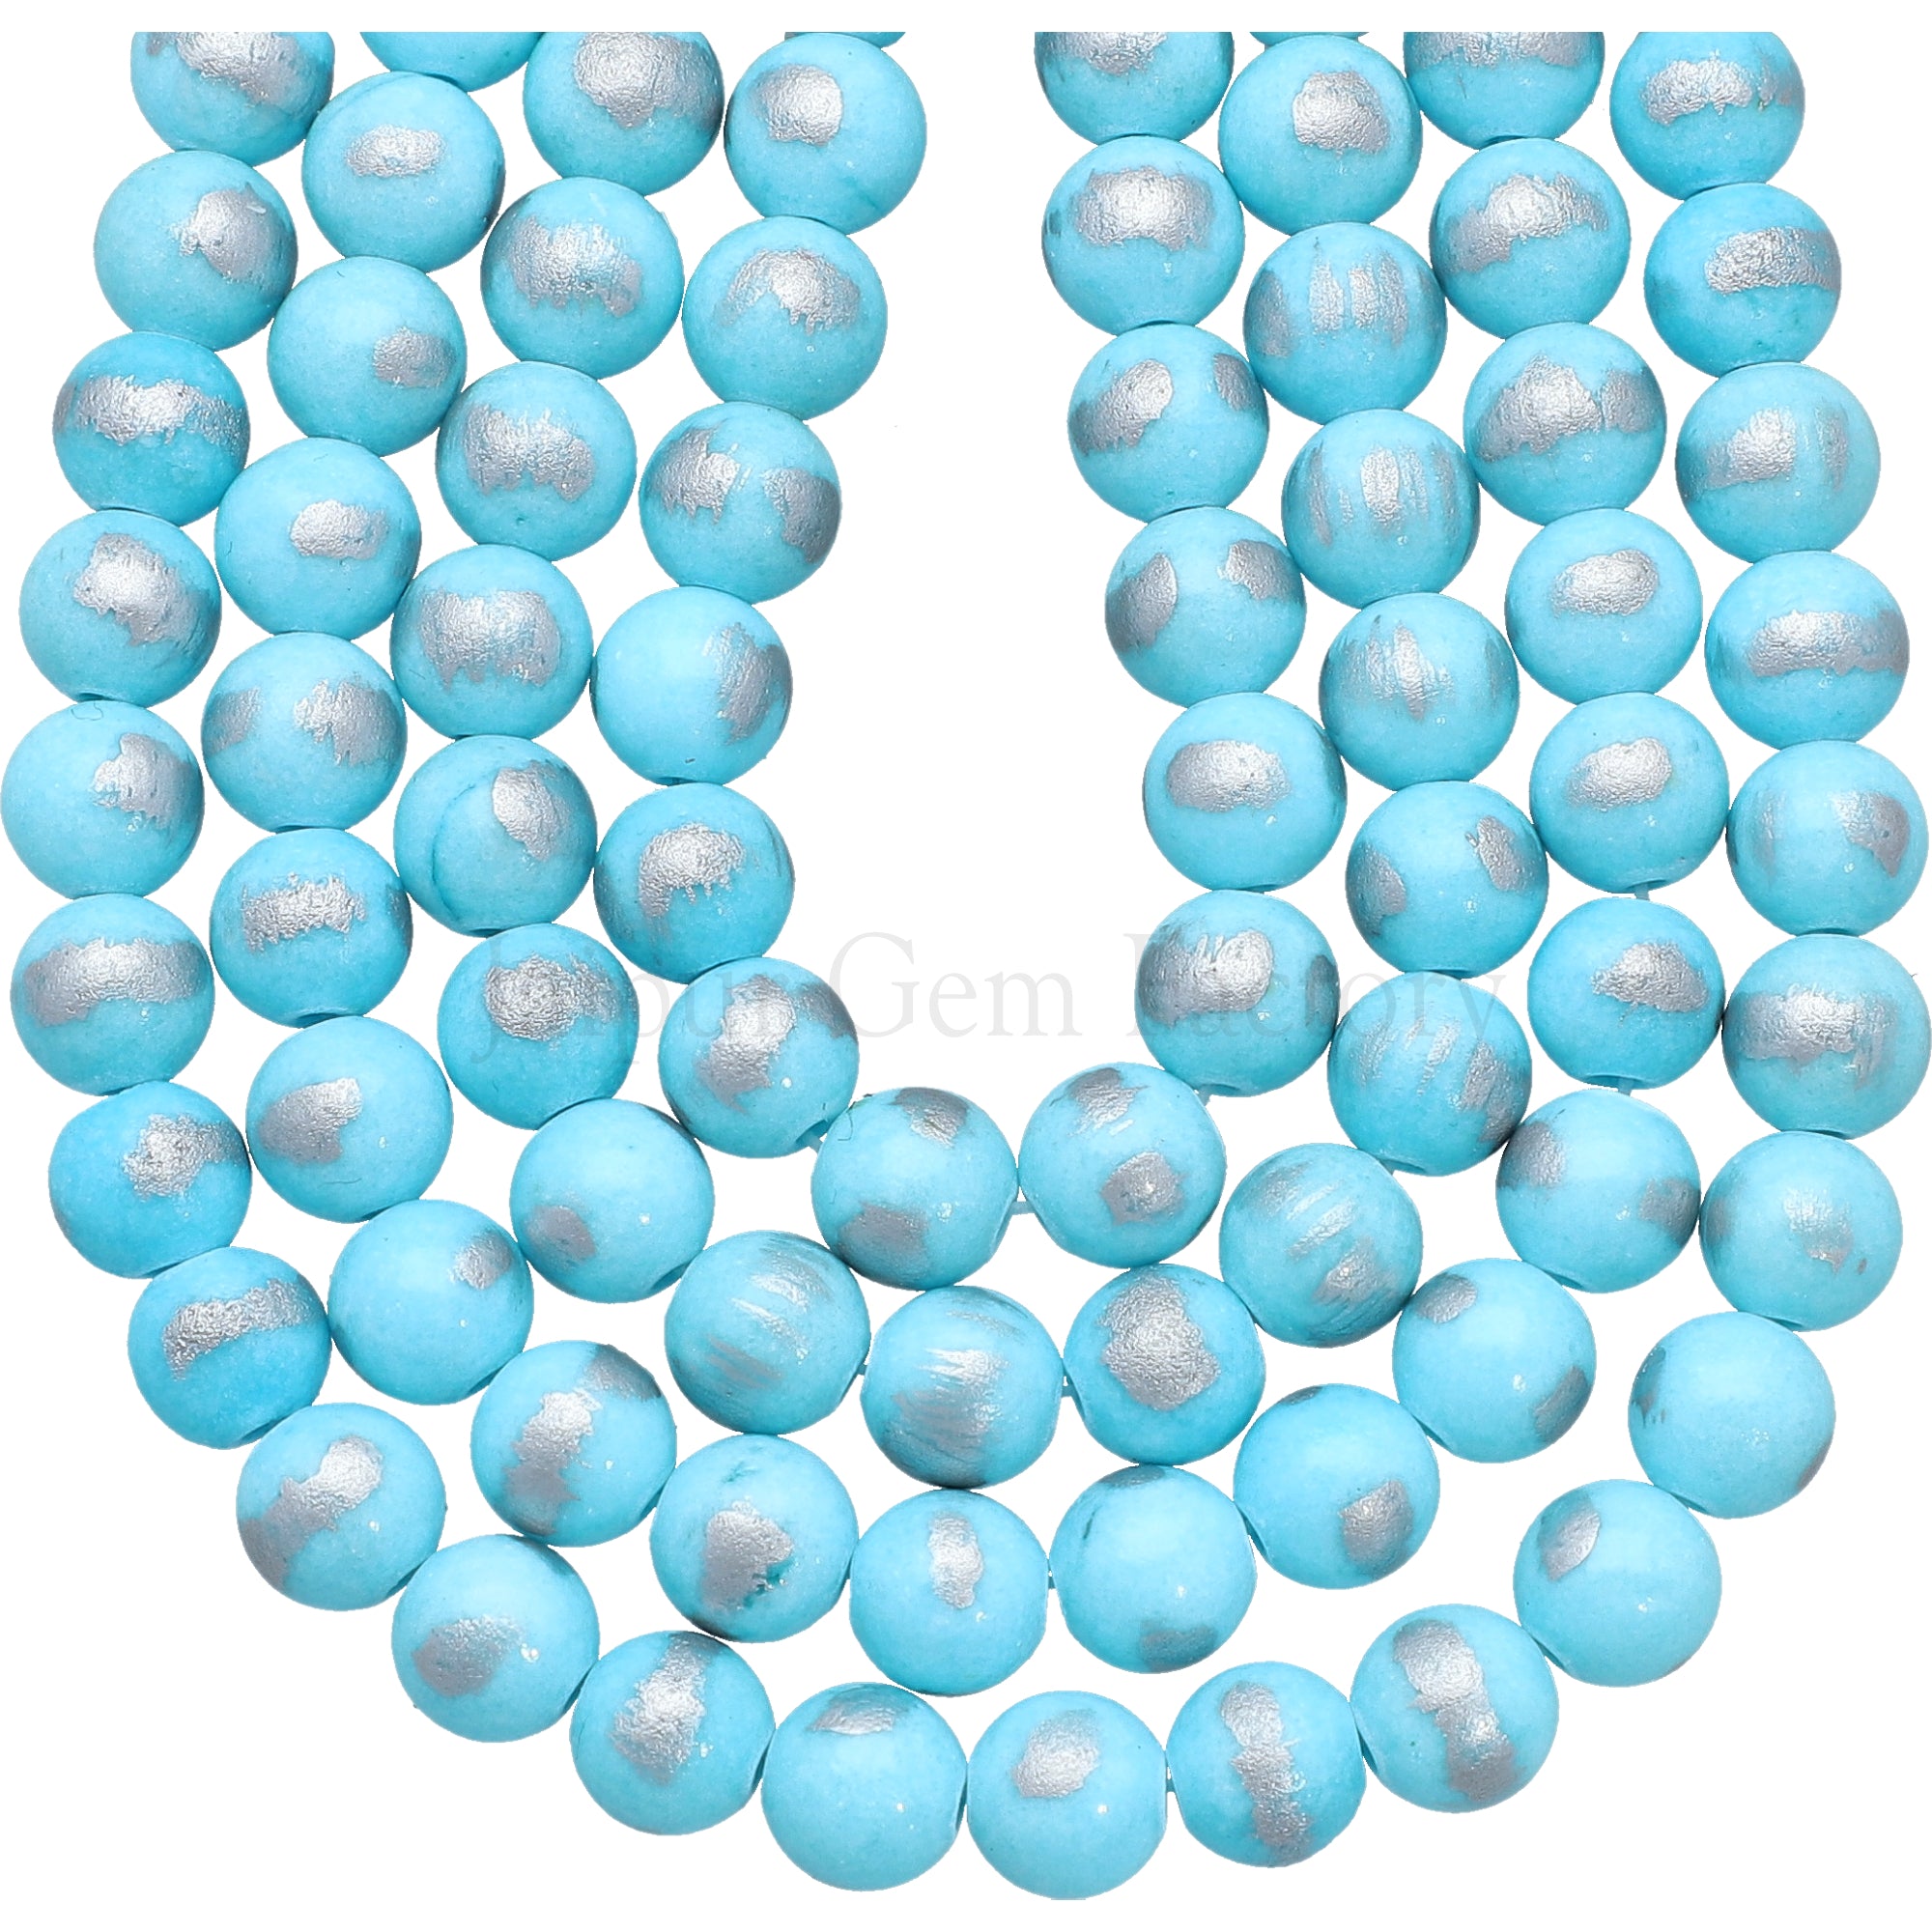 8 MM Sky Blue With Silver Foil Jade Smooth Round Beads 15 Inches Strand